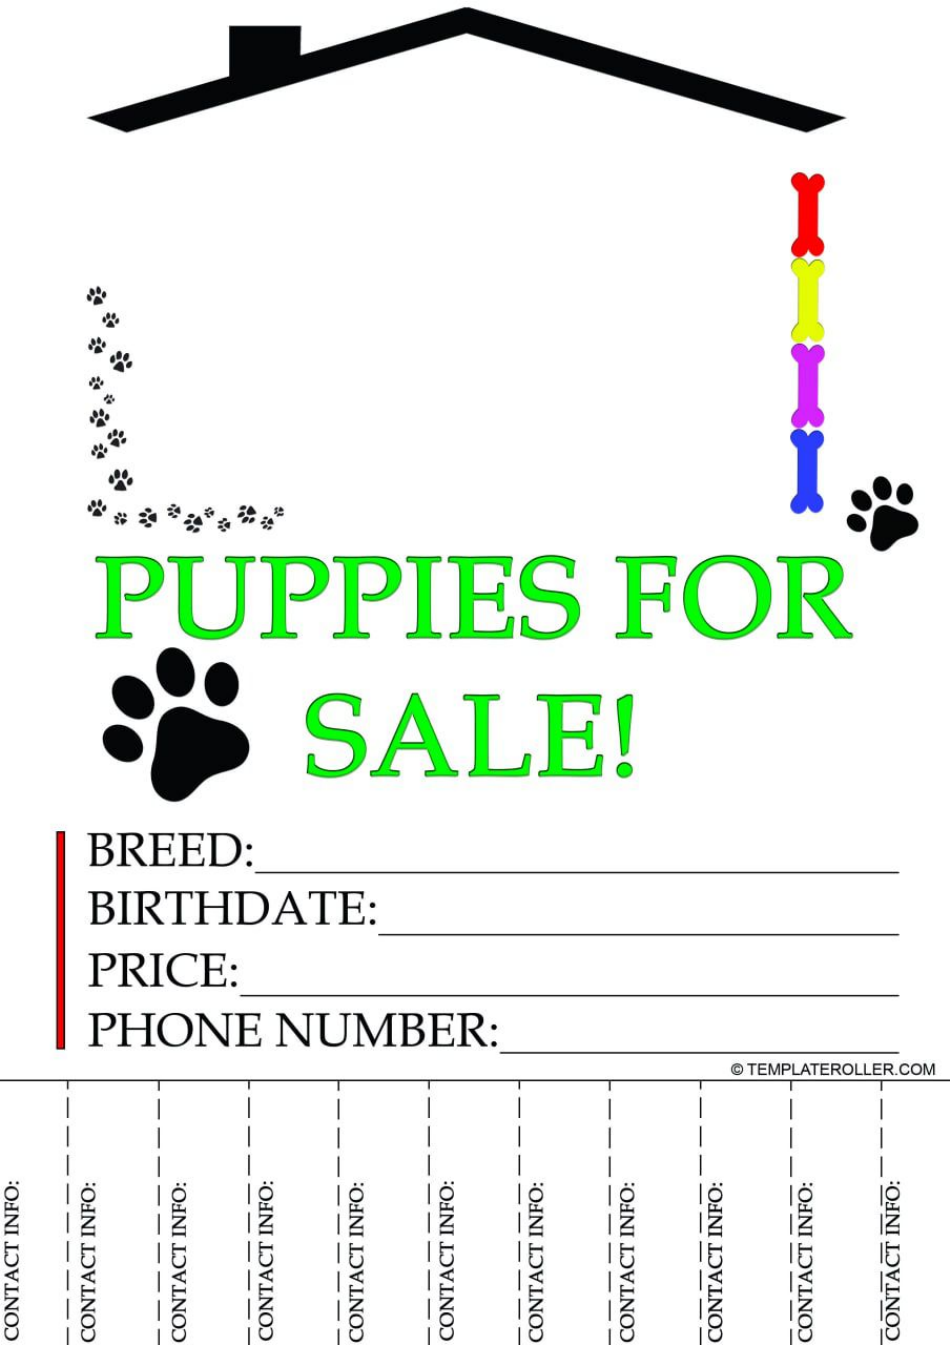 Puppies for Sale Flyer Template Download Printable PDF Intended For Puppy For Sale Flyer Templates